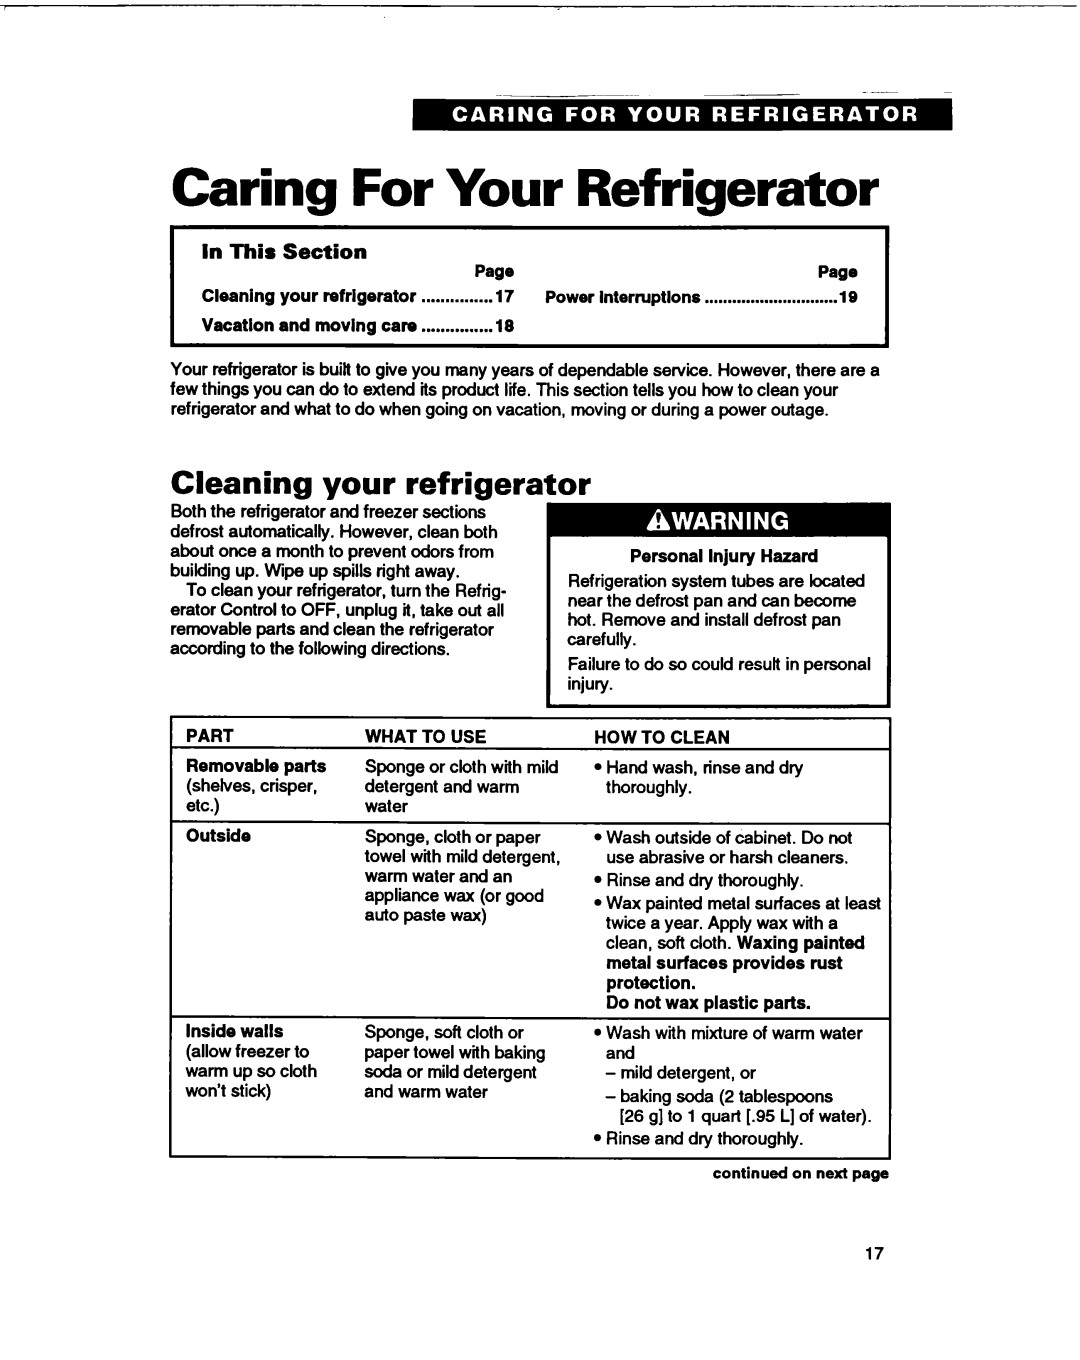 Whirlpool B2lDK important safety instructions Caring For Your Refrigerator, Cleaning your refrigerator, In This, Section 